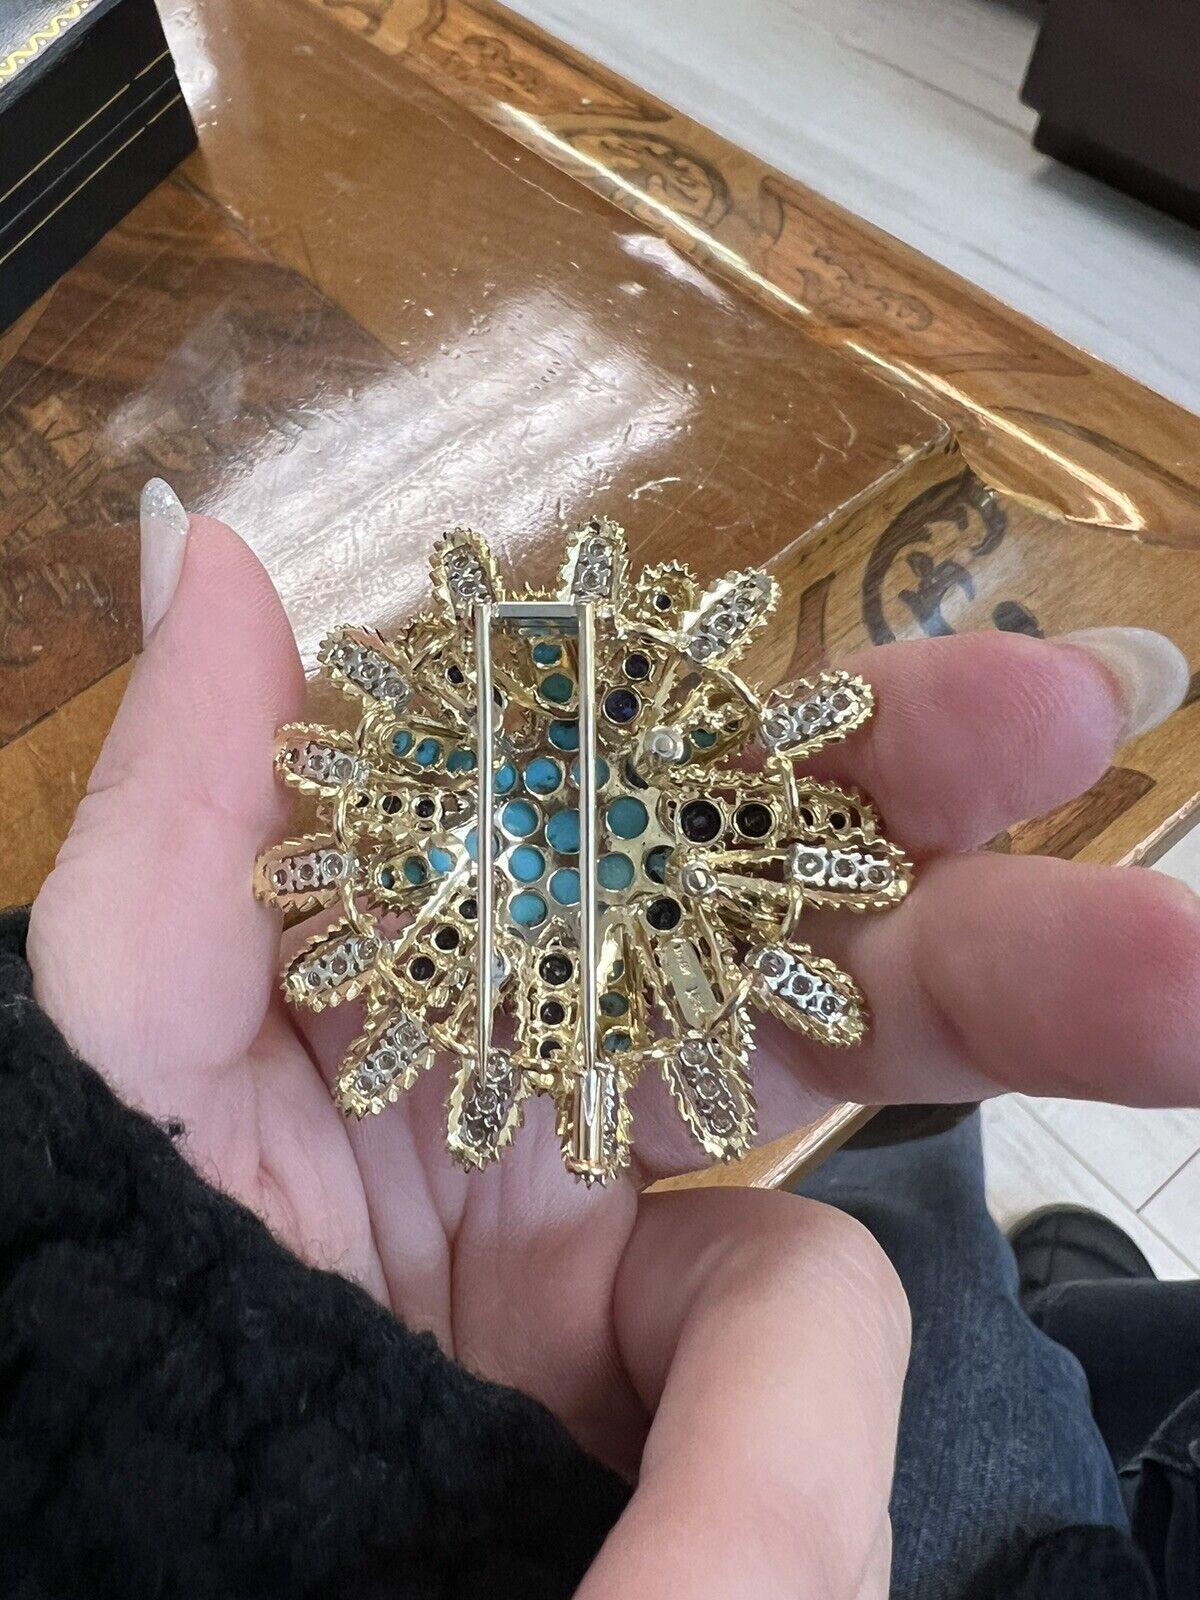 Tiffany & Co. 18k Yellow Gold, Turquoise, Sapphire & Diamond Brooch Vintage

Here is your chance to purchase a beautiful and highly collectible designer brooch.  Truly a great piece at a great price! 

The weight is 34 grams.  

The length is 2